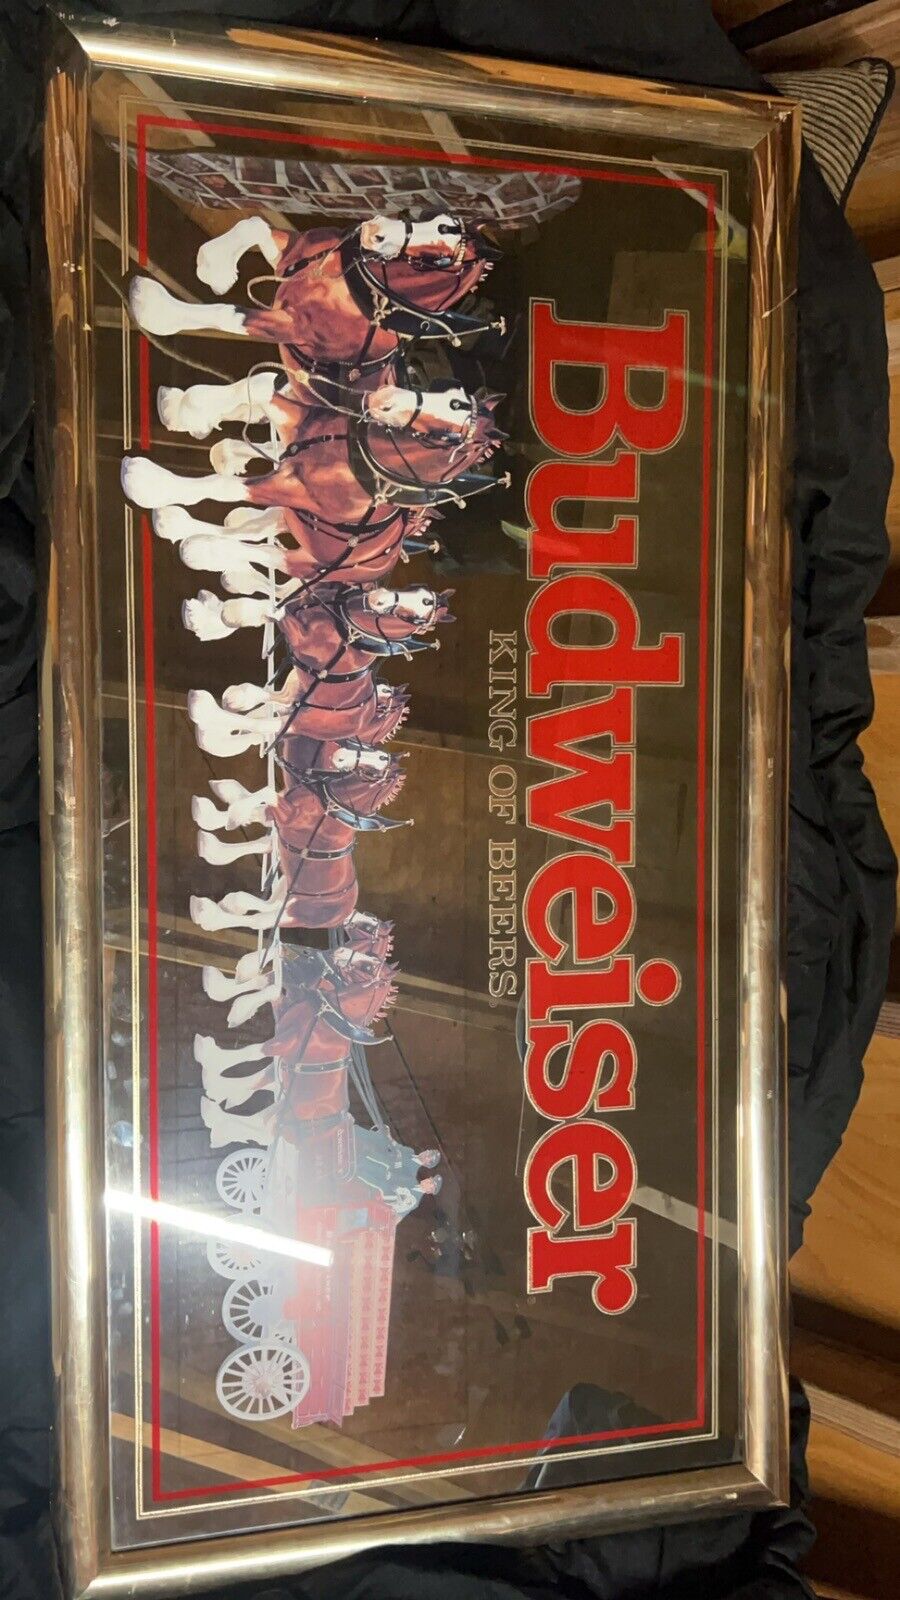 Budweiser Clydesdale King Of Beers Mirror 51.25”x26.25”